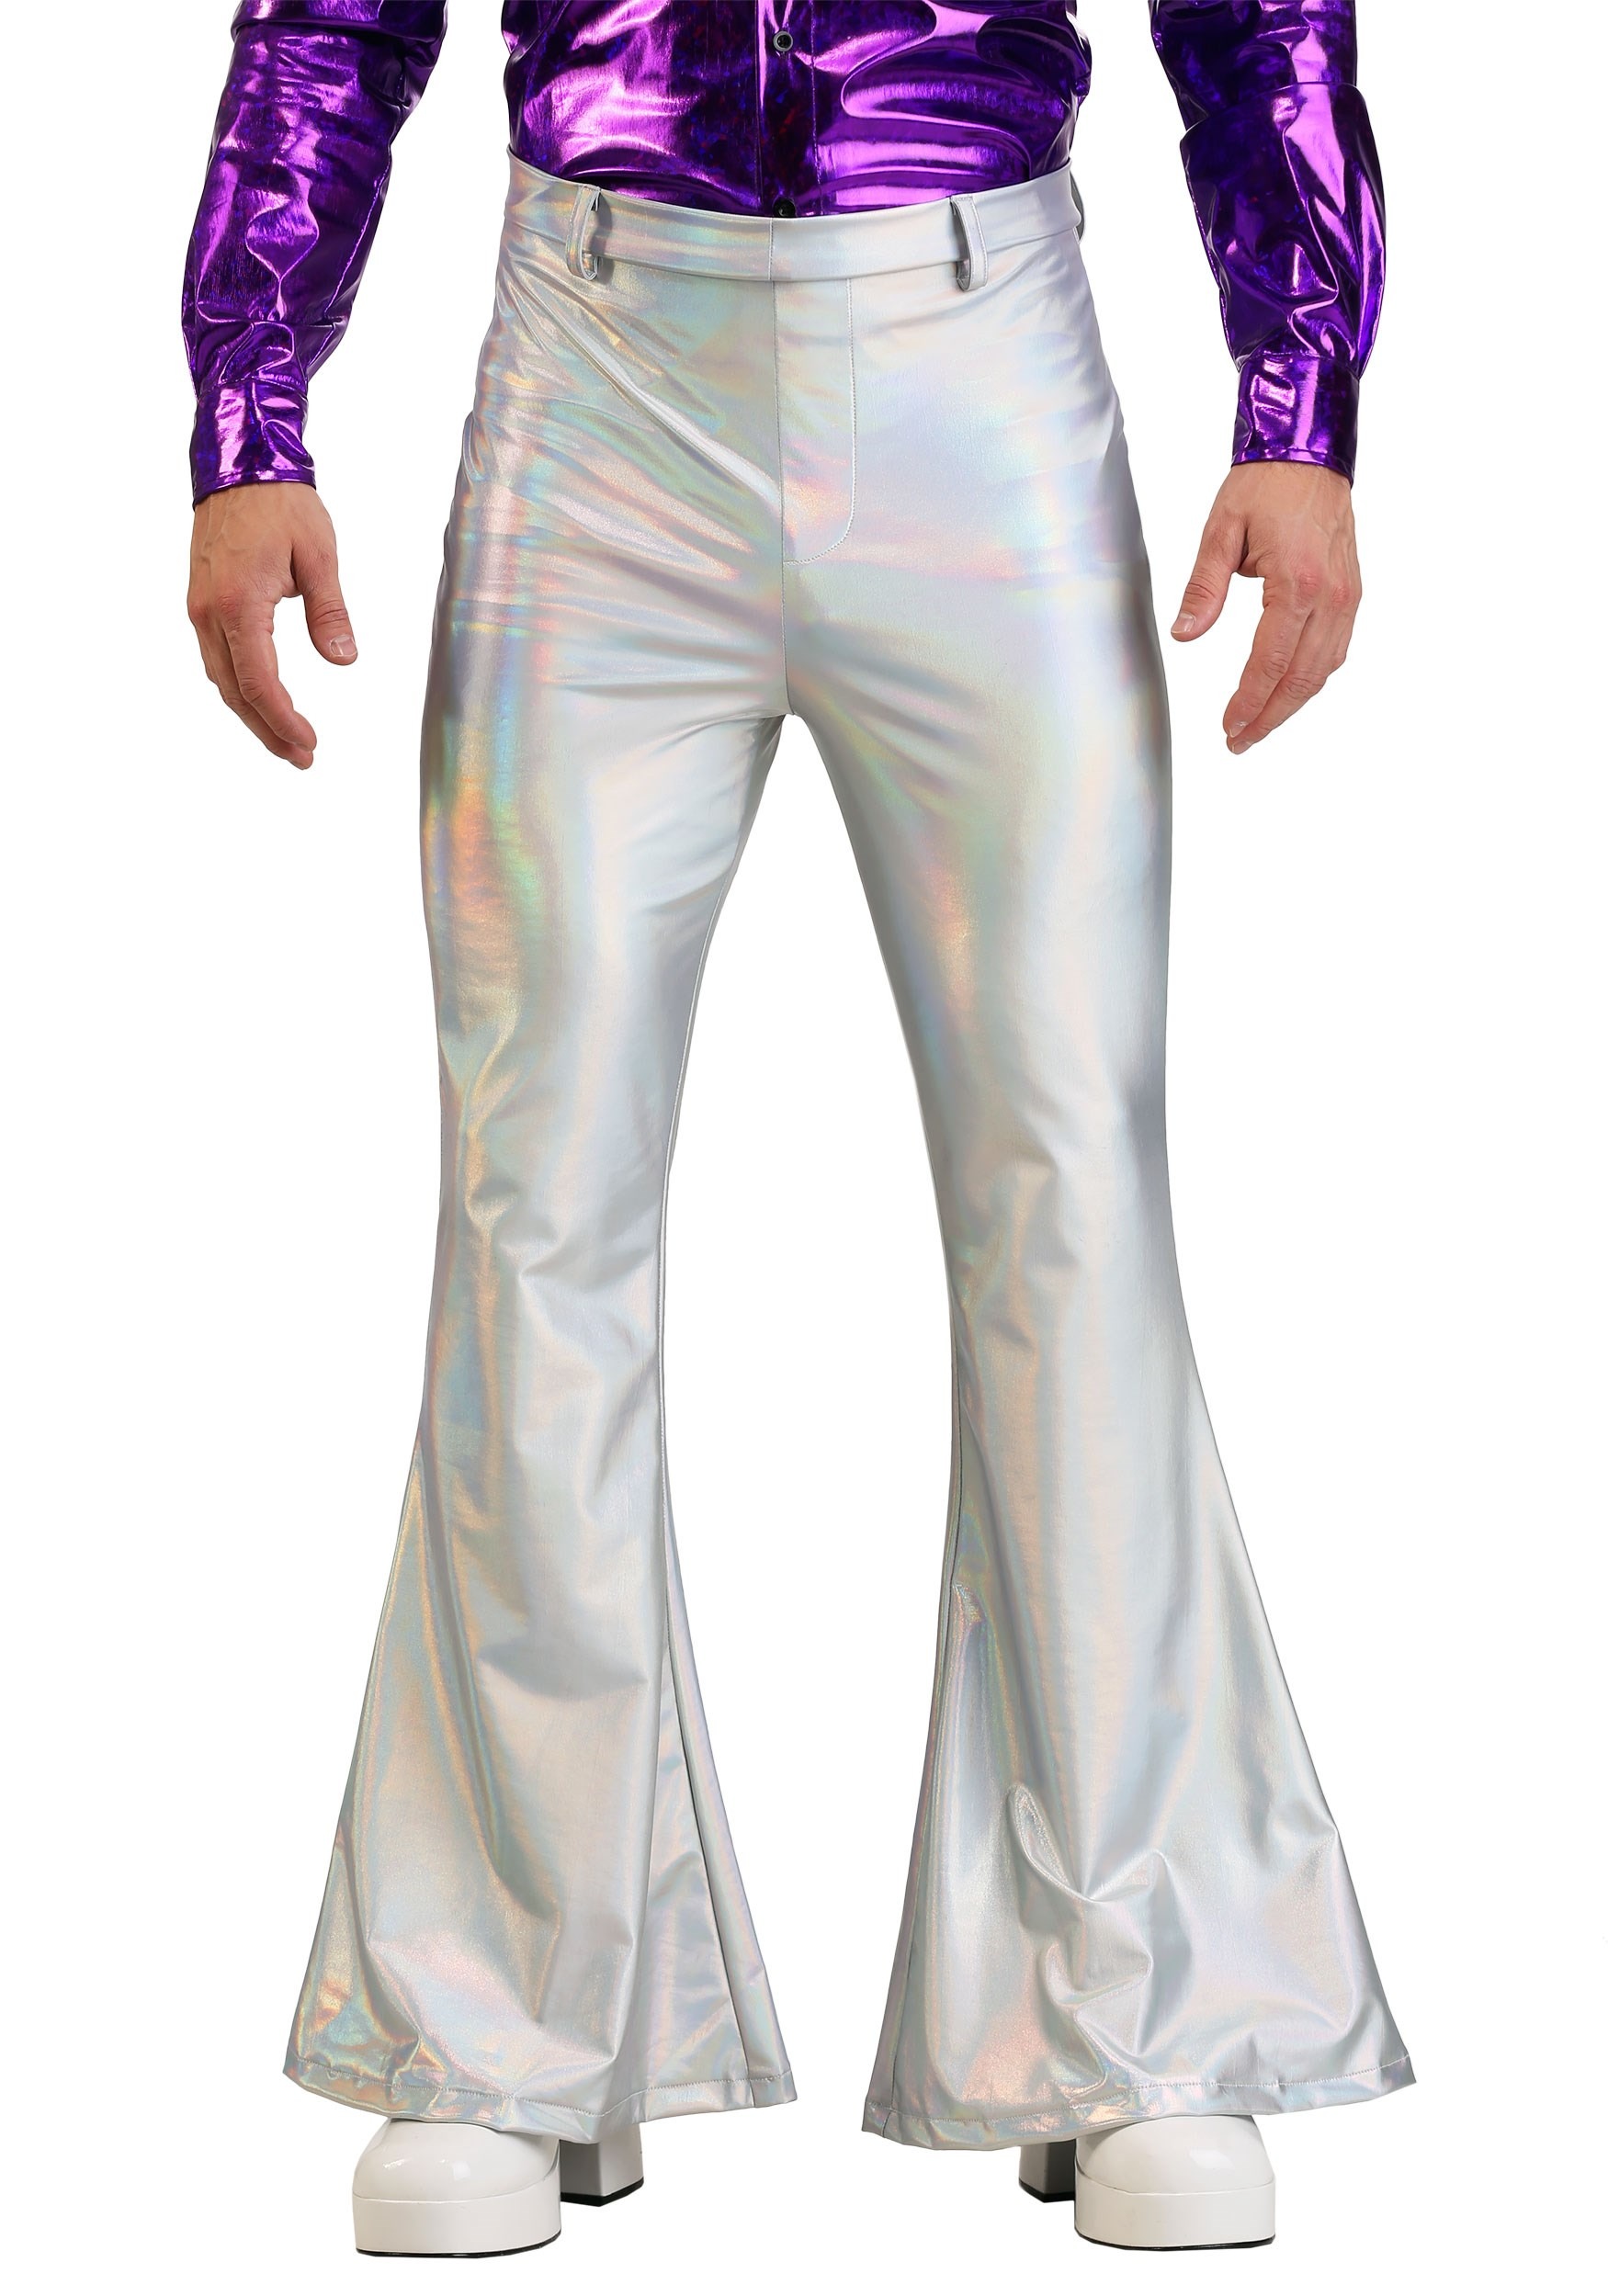 https://images.halloweencostumes.ca/products/65204/1-1/mens-plus-size-holographic-disco-pants-1.jpg